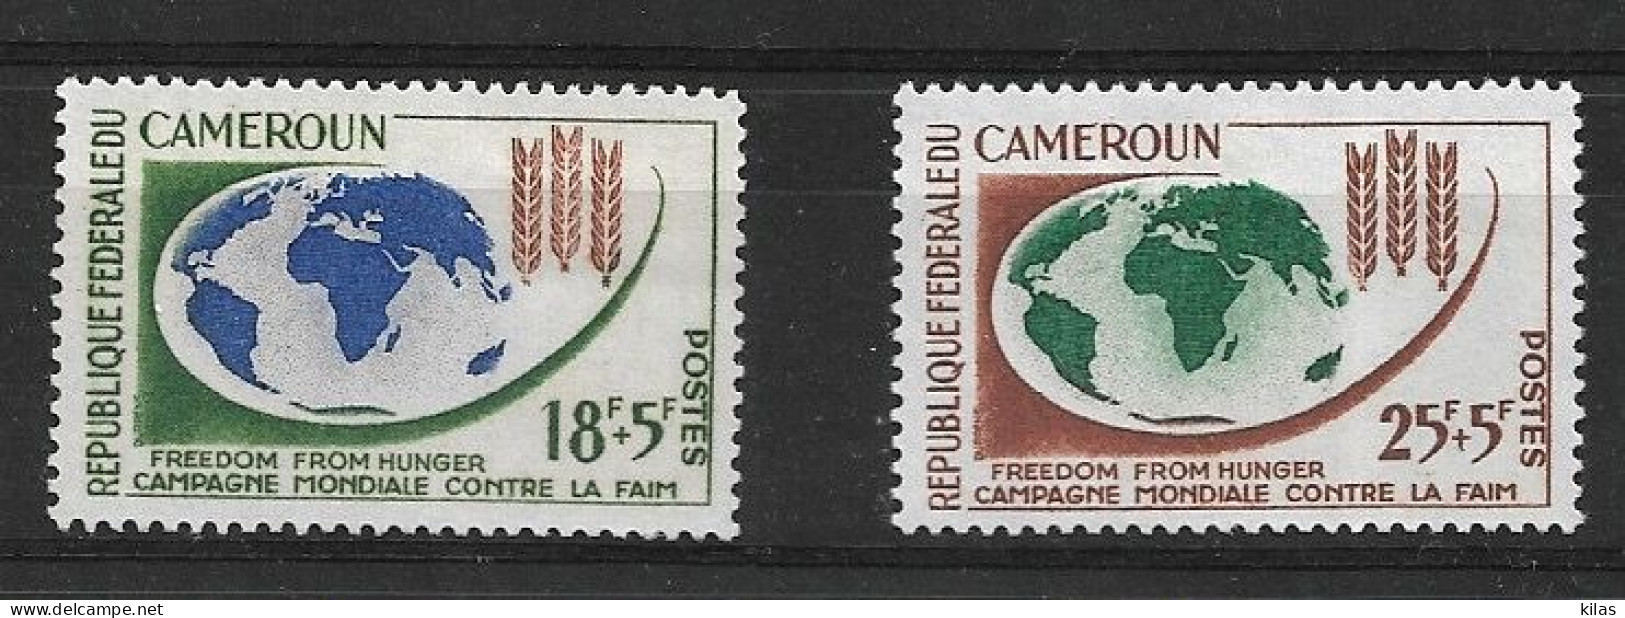 CAMEROON 1963 FREEDOM FROM HUNGER MNH - Ernährung